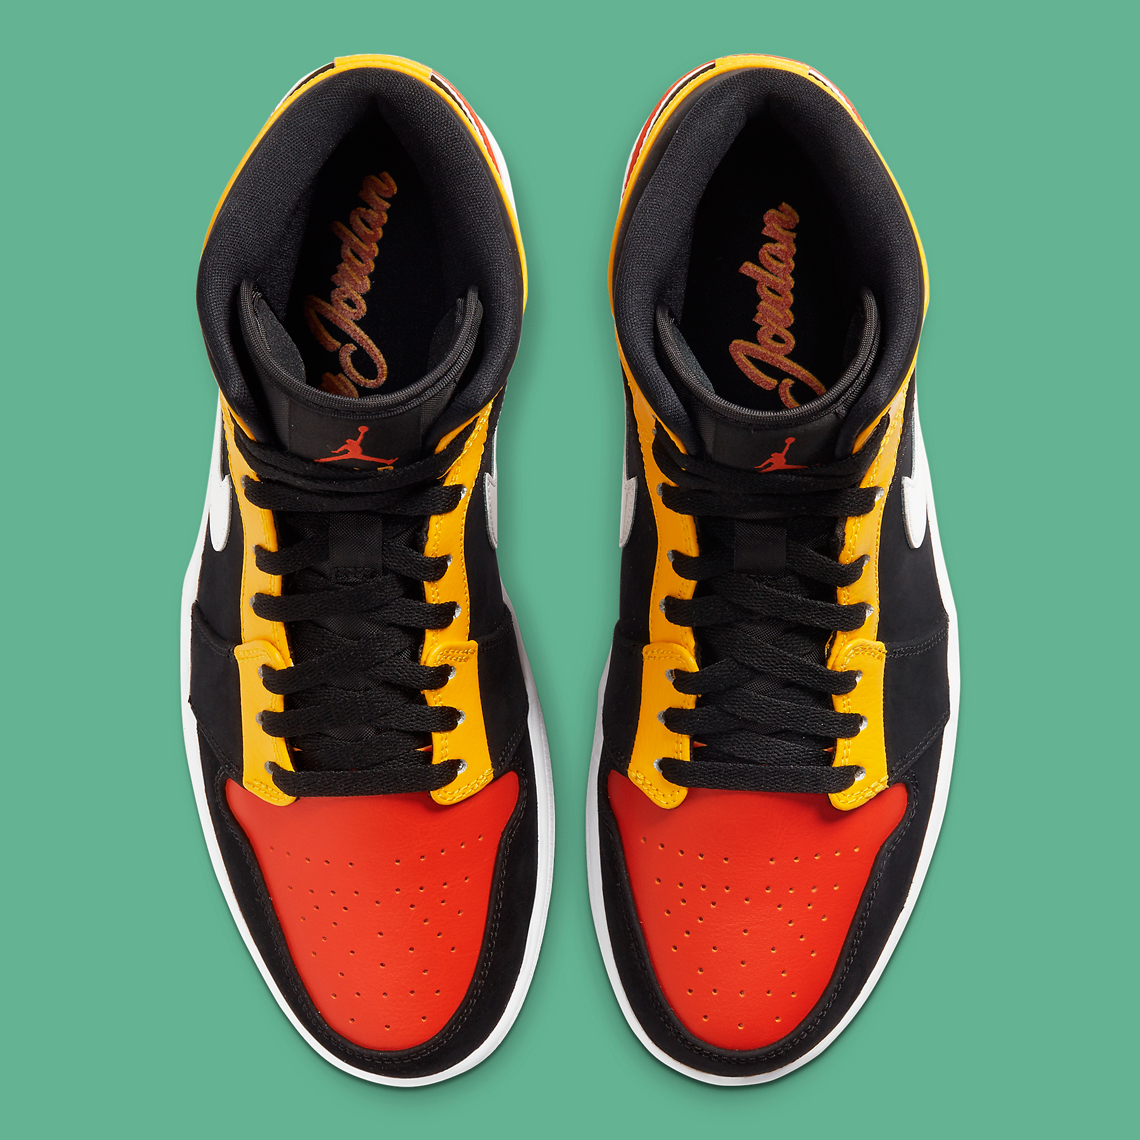 Air Jordan 1 Mid Receives Raygun-Inspired Makeover: Official s